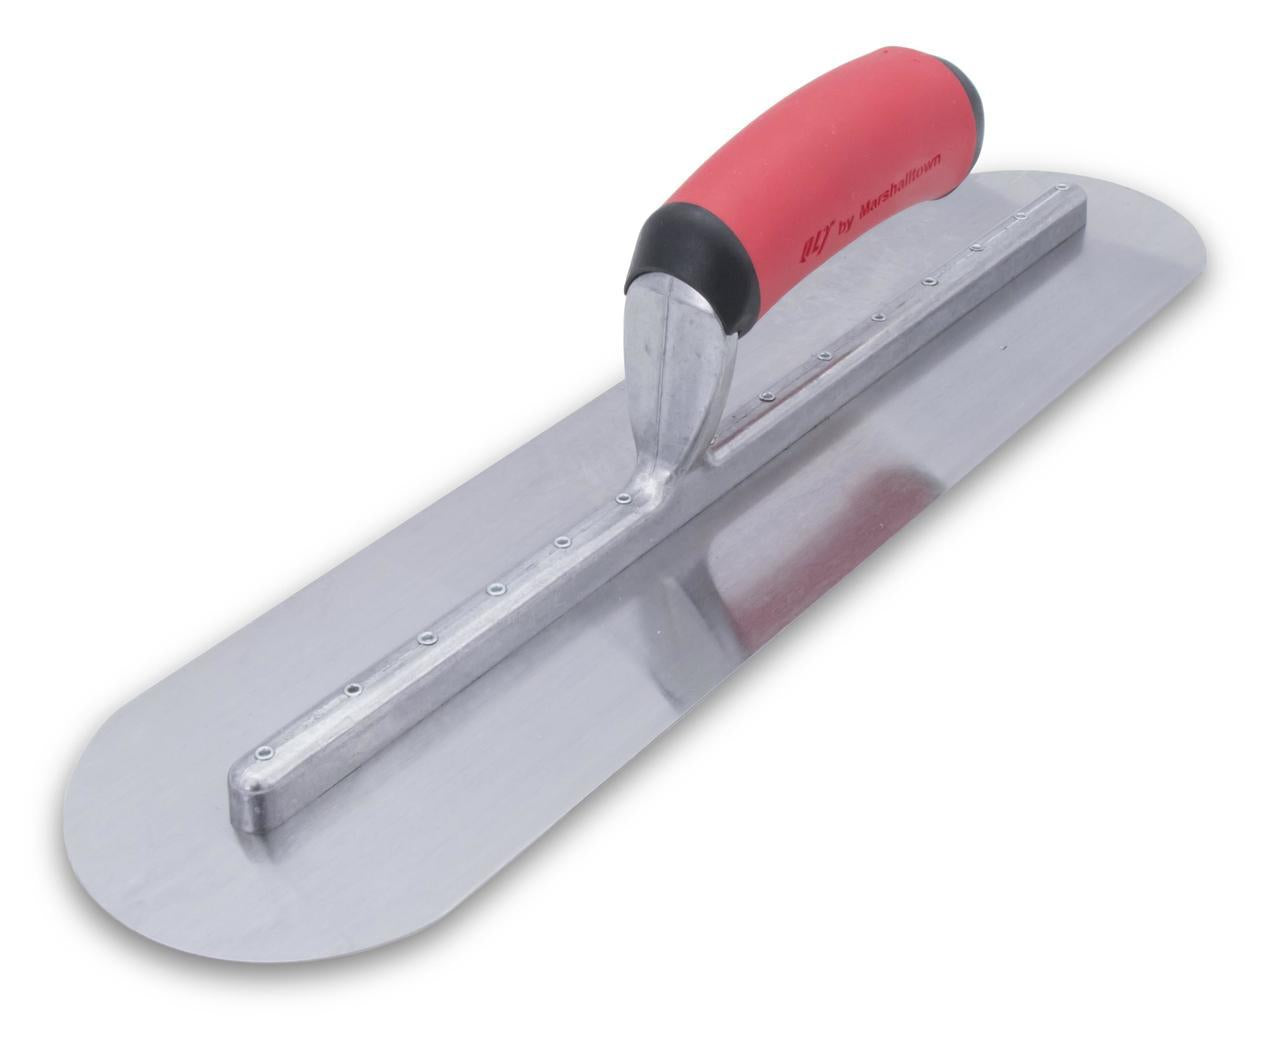 Marshalltown 11218 Concrete 12 X 4 Fully Rounded Finishing Trowel-Resilient Handle